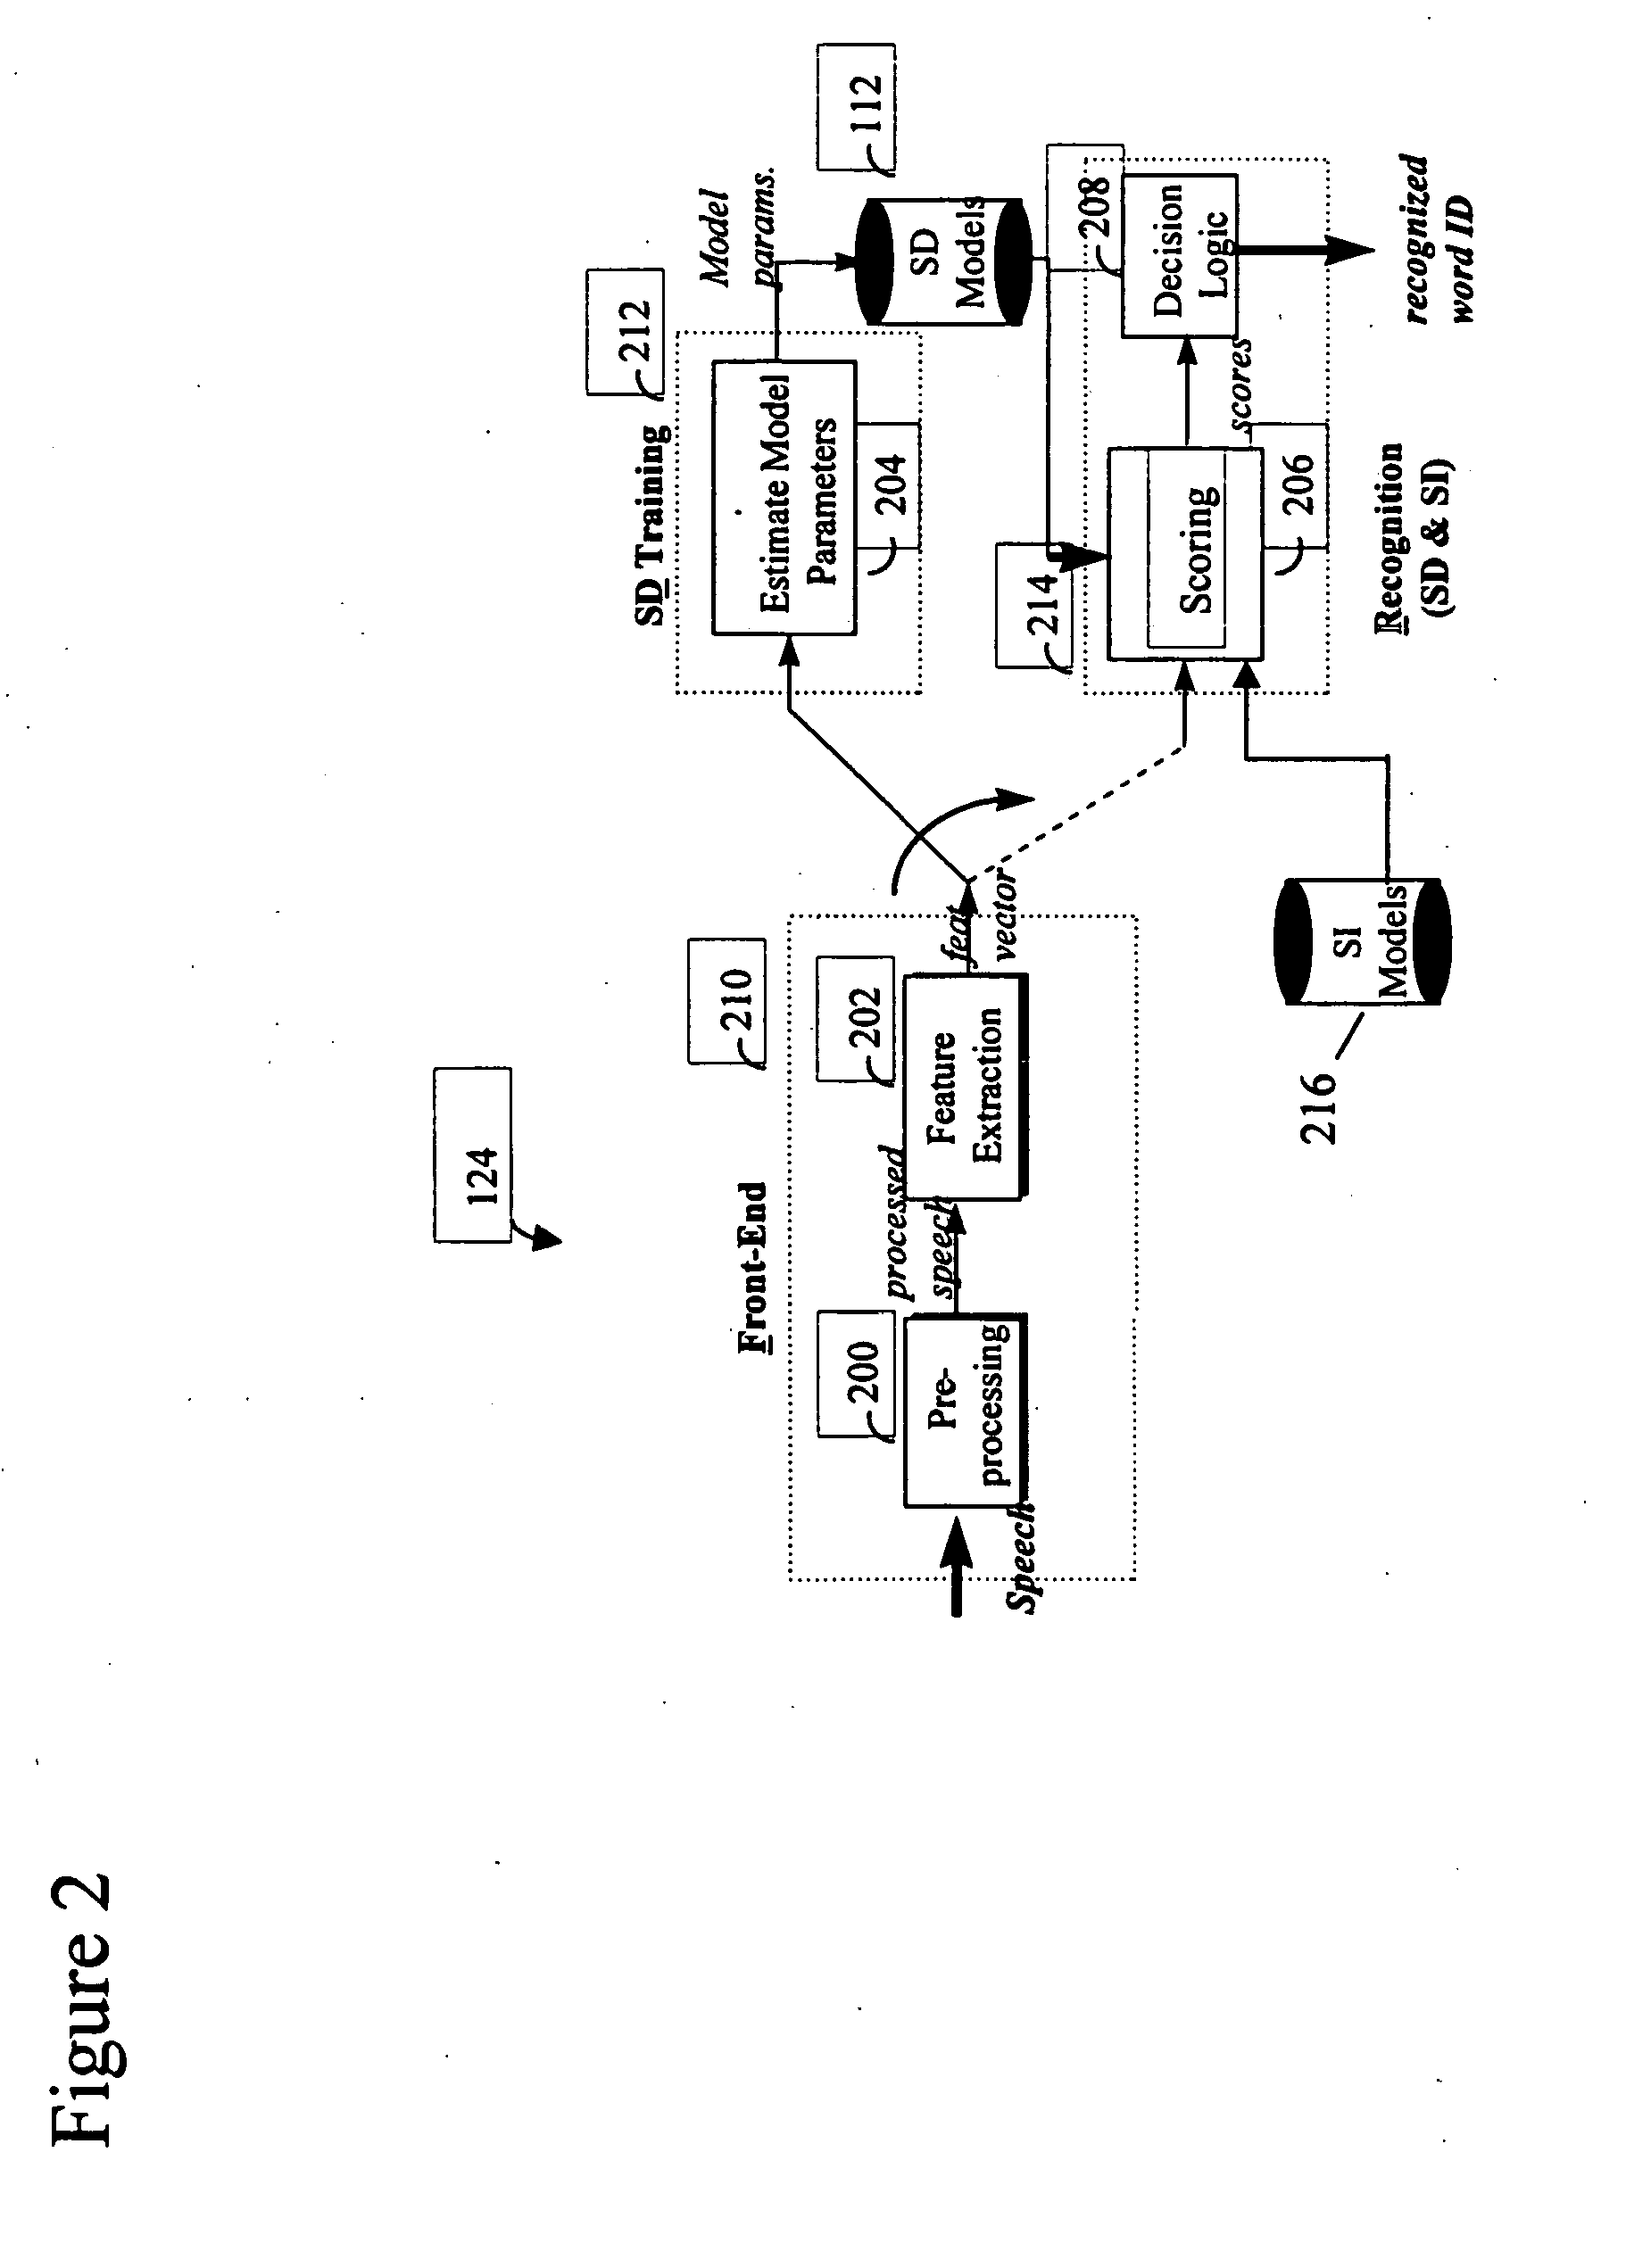 Automatic speech recognition to control integrated communication devices